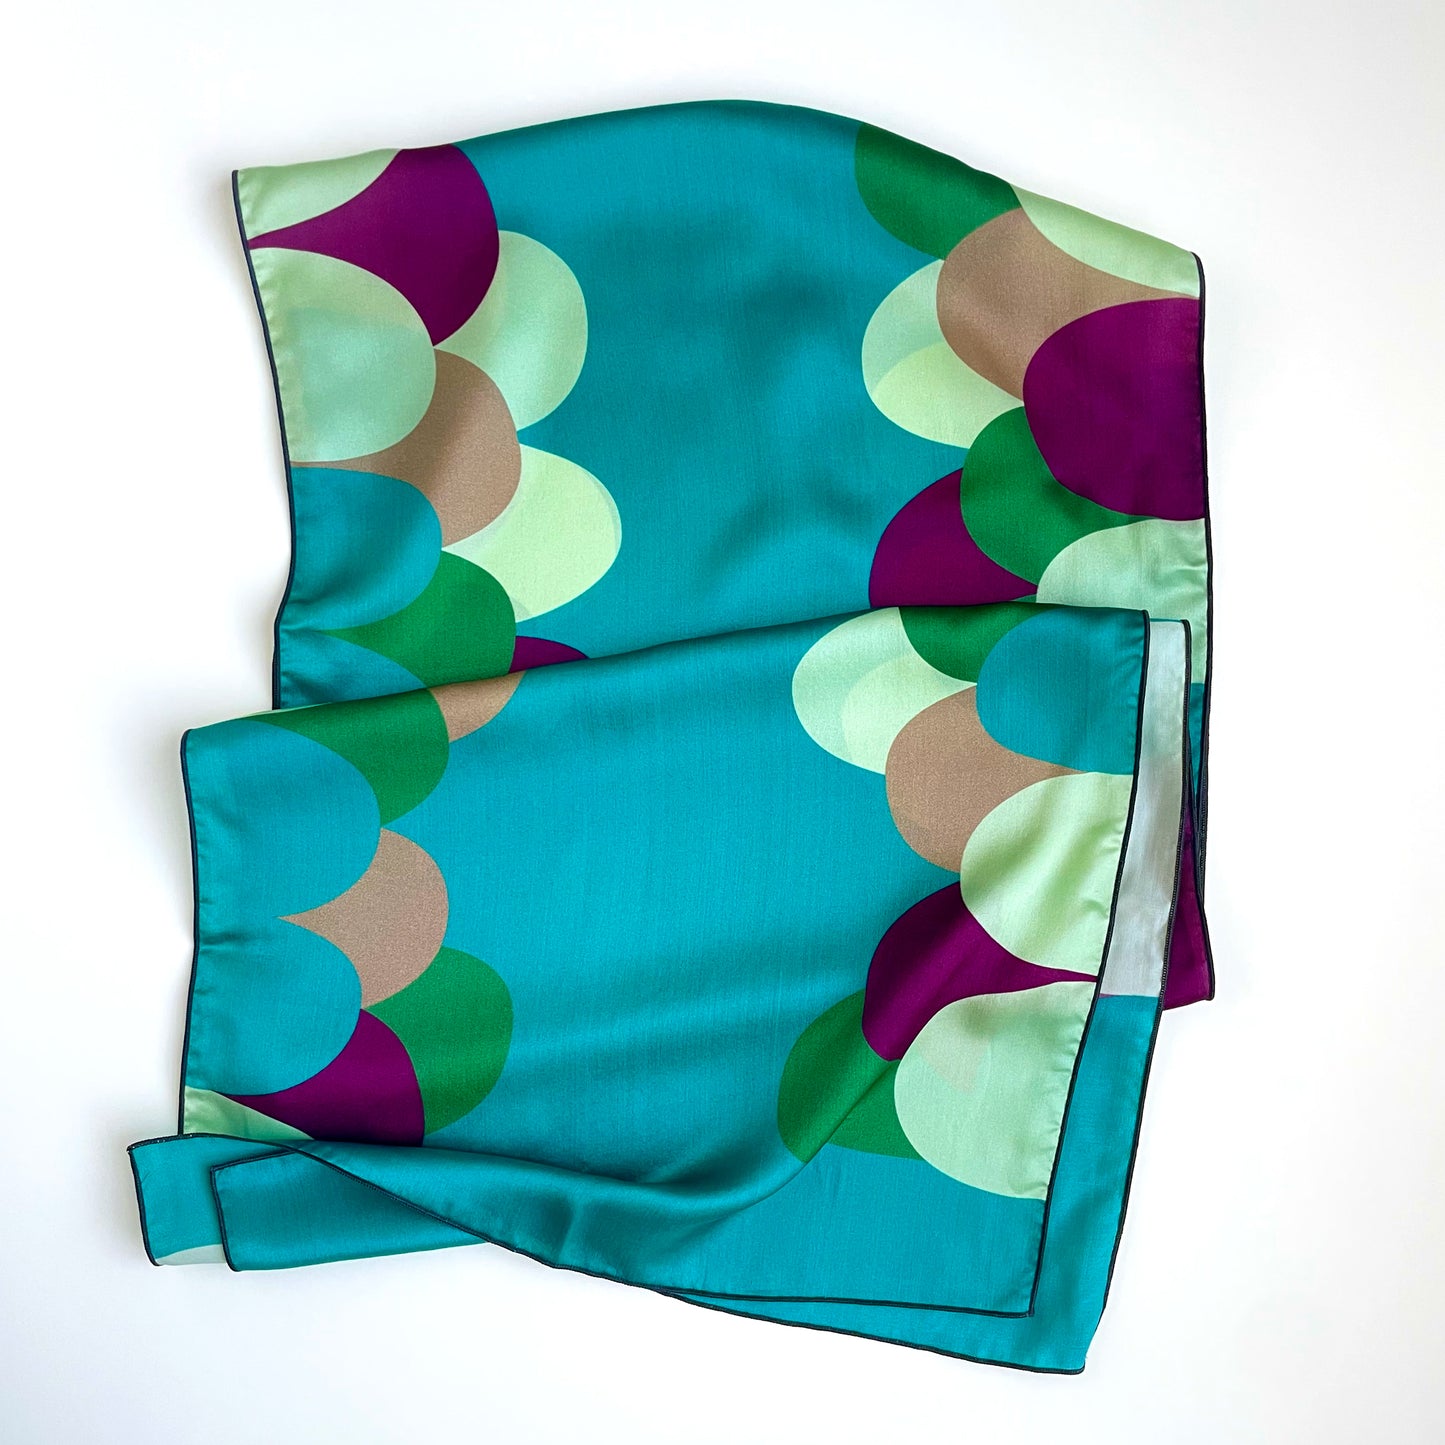 Organic retro shapes in jewel tones of purple, green, cream, and teal are a vibrant way to boost your mood with this luxurious long silk charmeuse scarf 